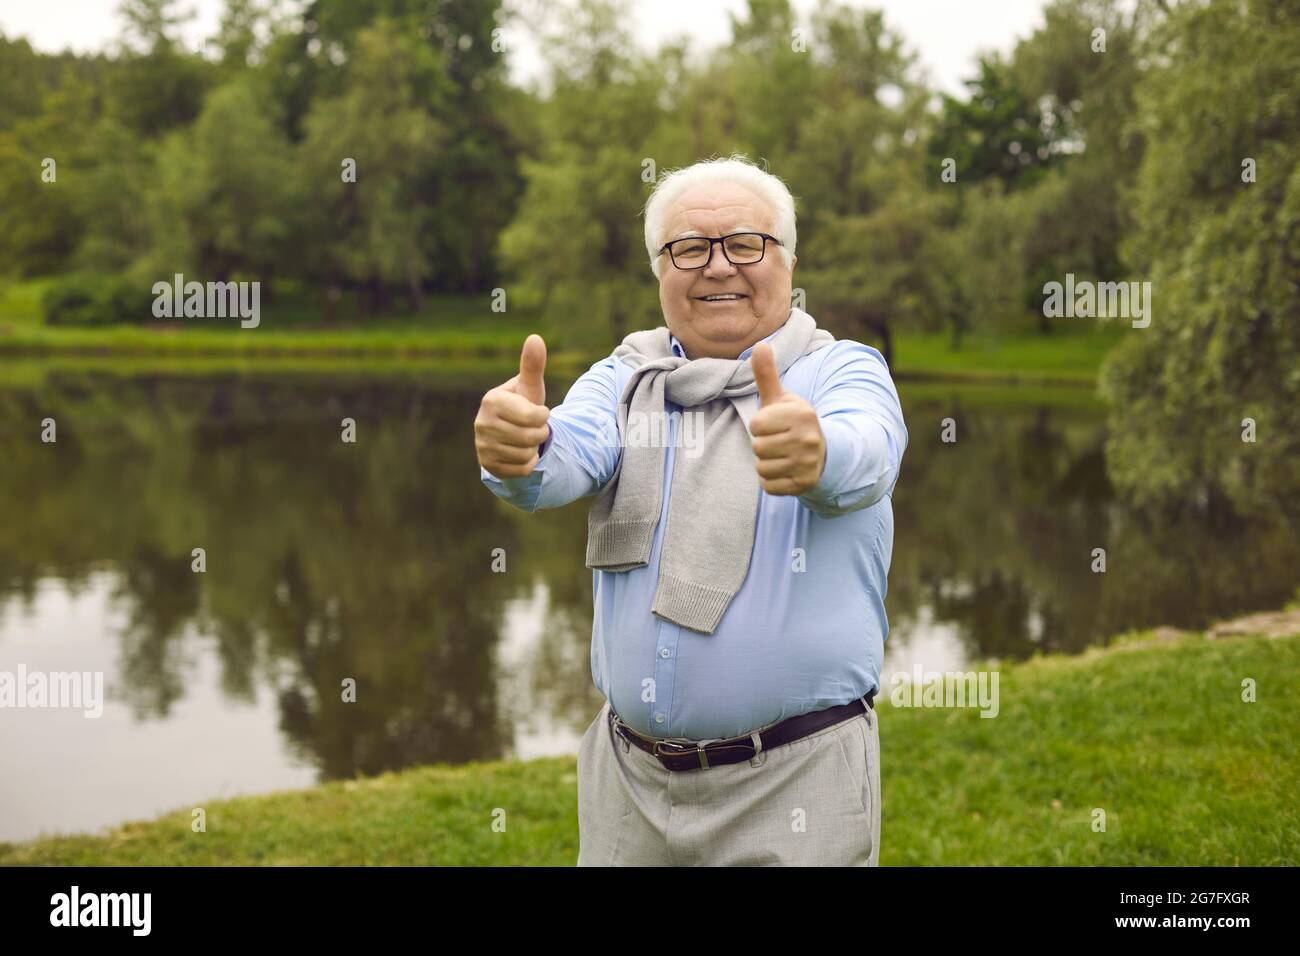 Portrait of a happy senior citizen standing in a green park and giving a thumbs up Stock Photo